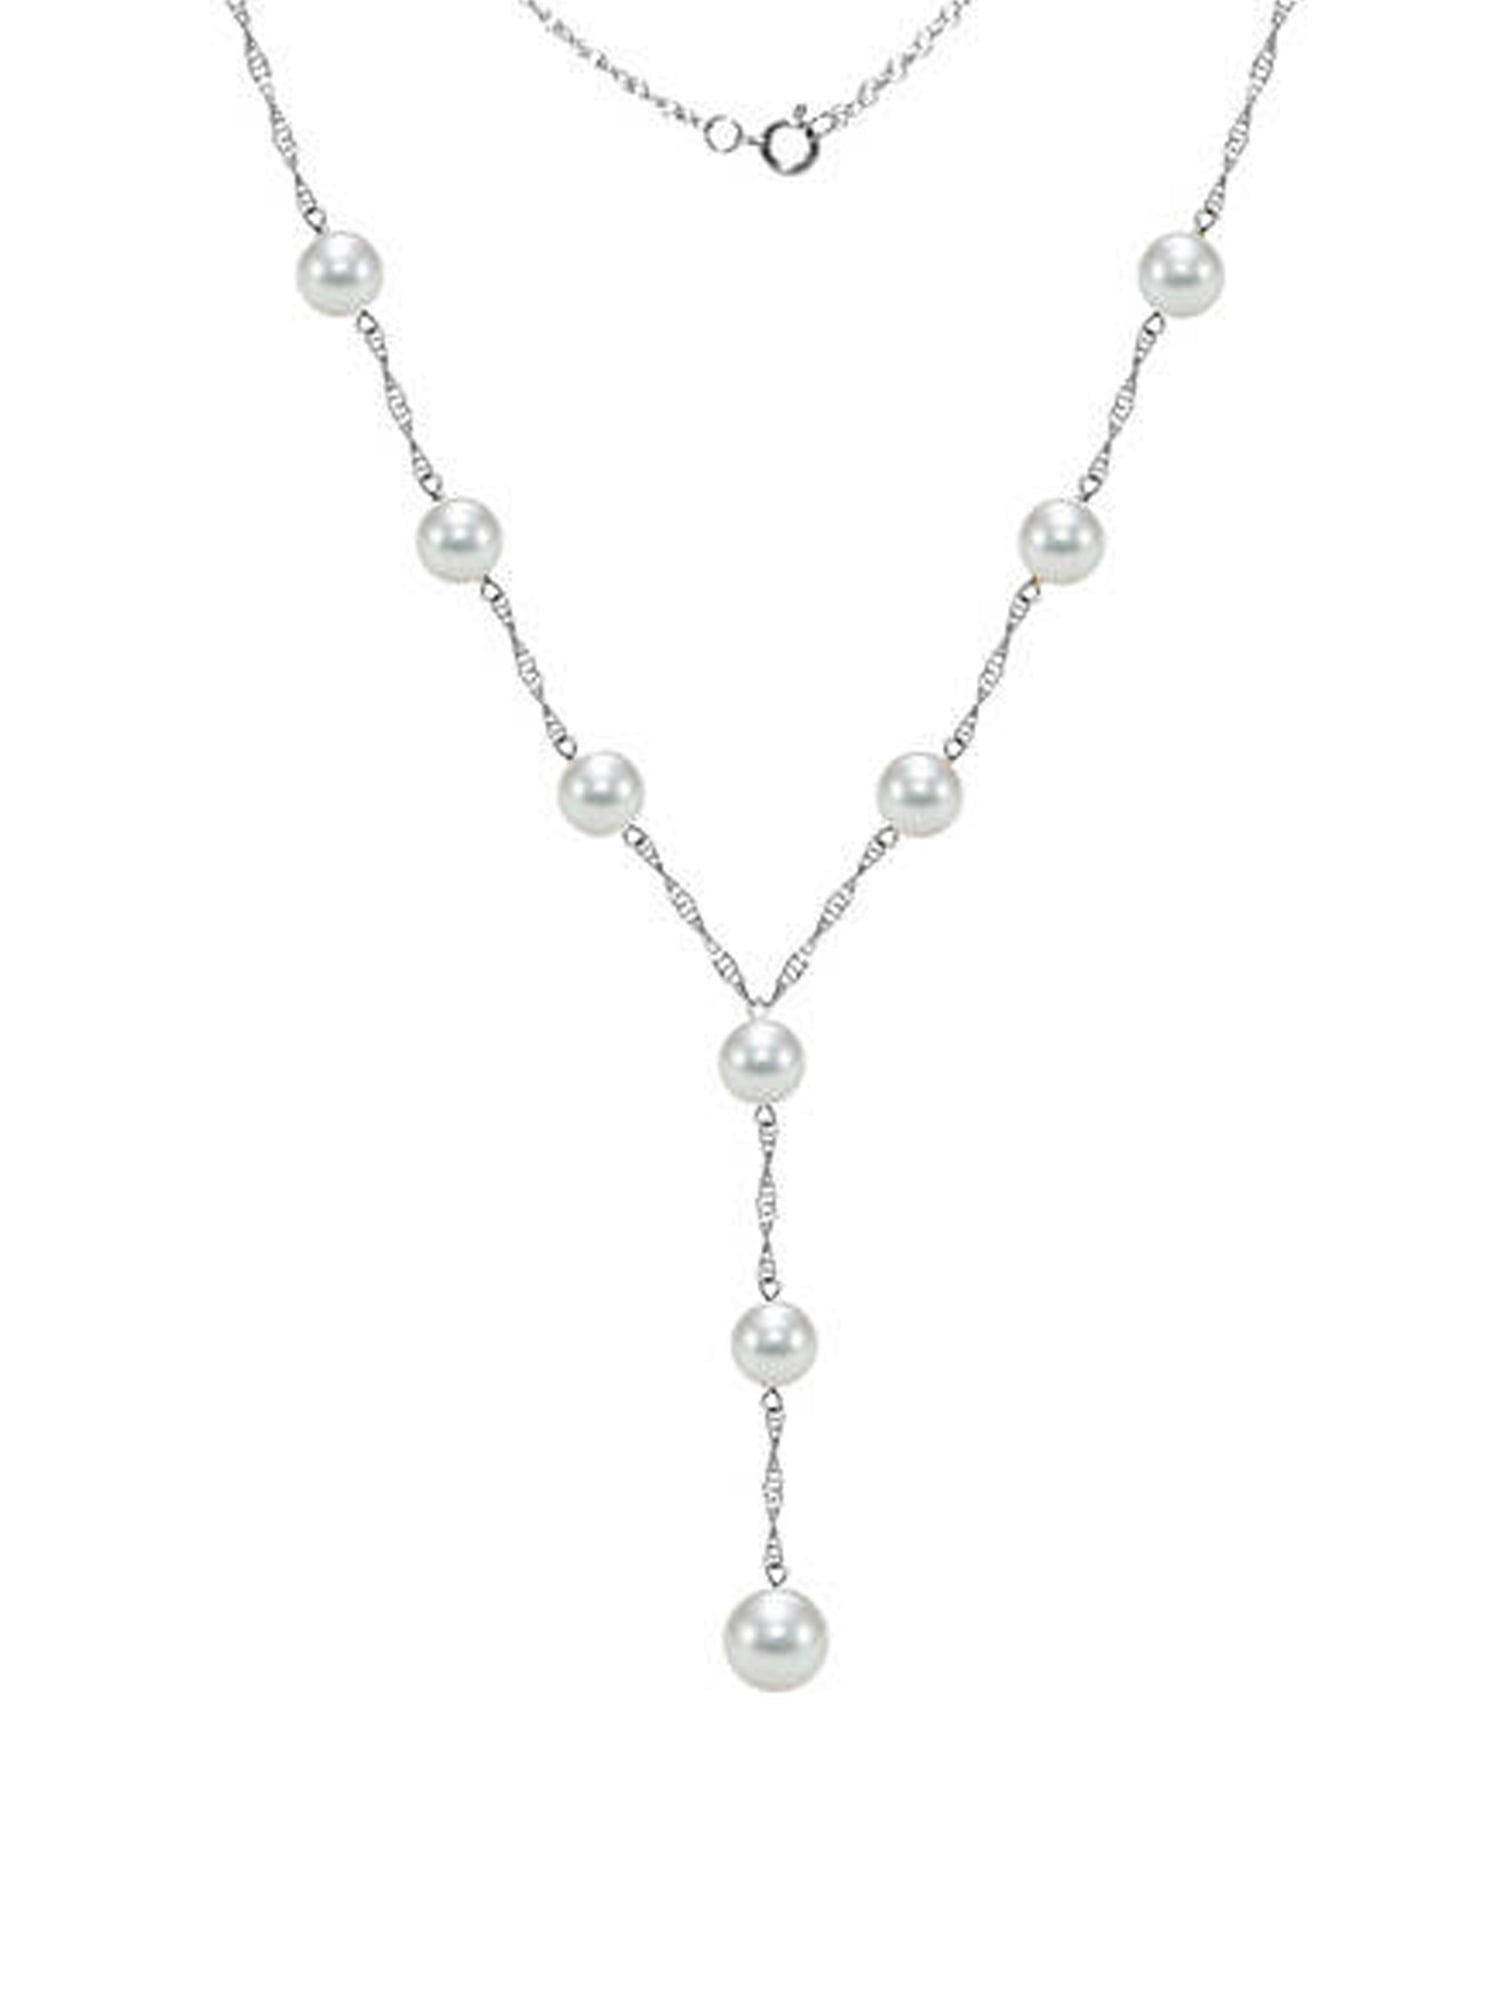 Pearls - ADDURN 14kt Gold 6-6.5mm Akoya Pearl Stations Lariat Necklace ...